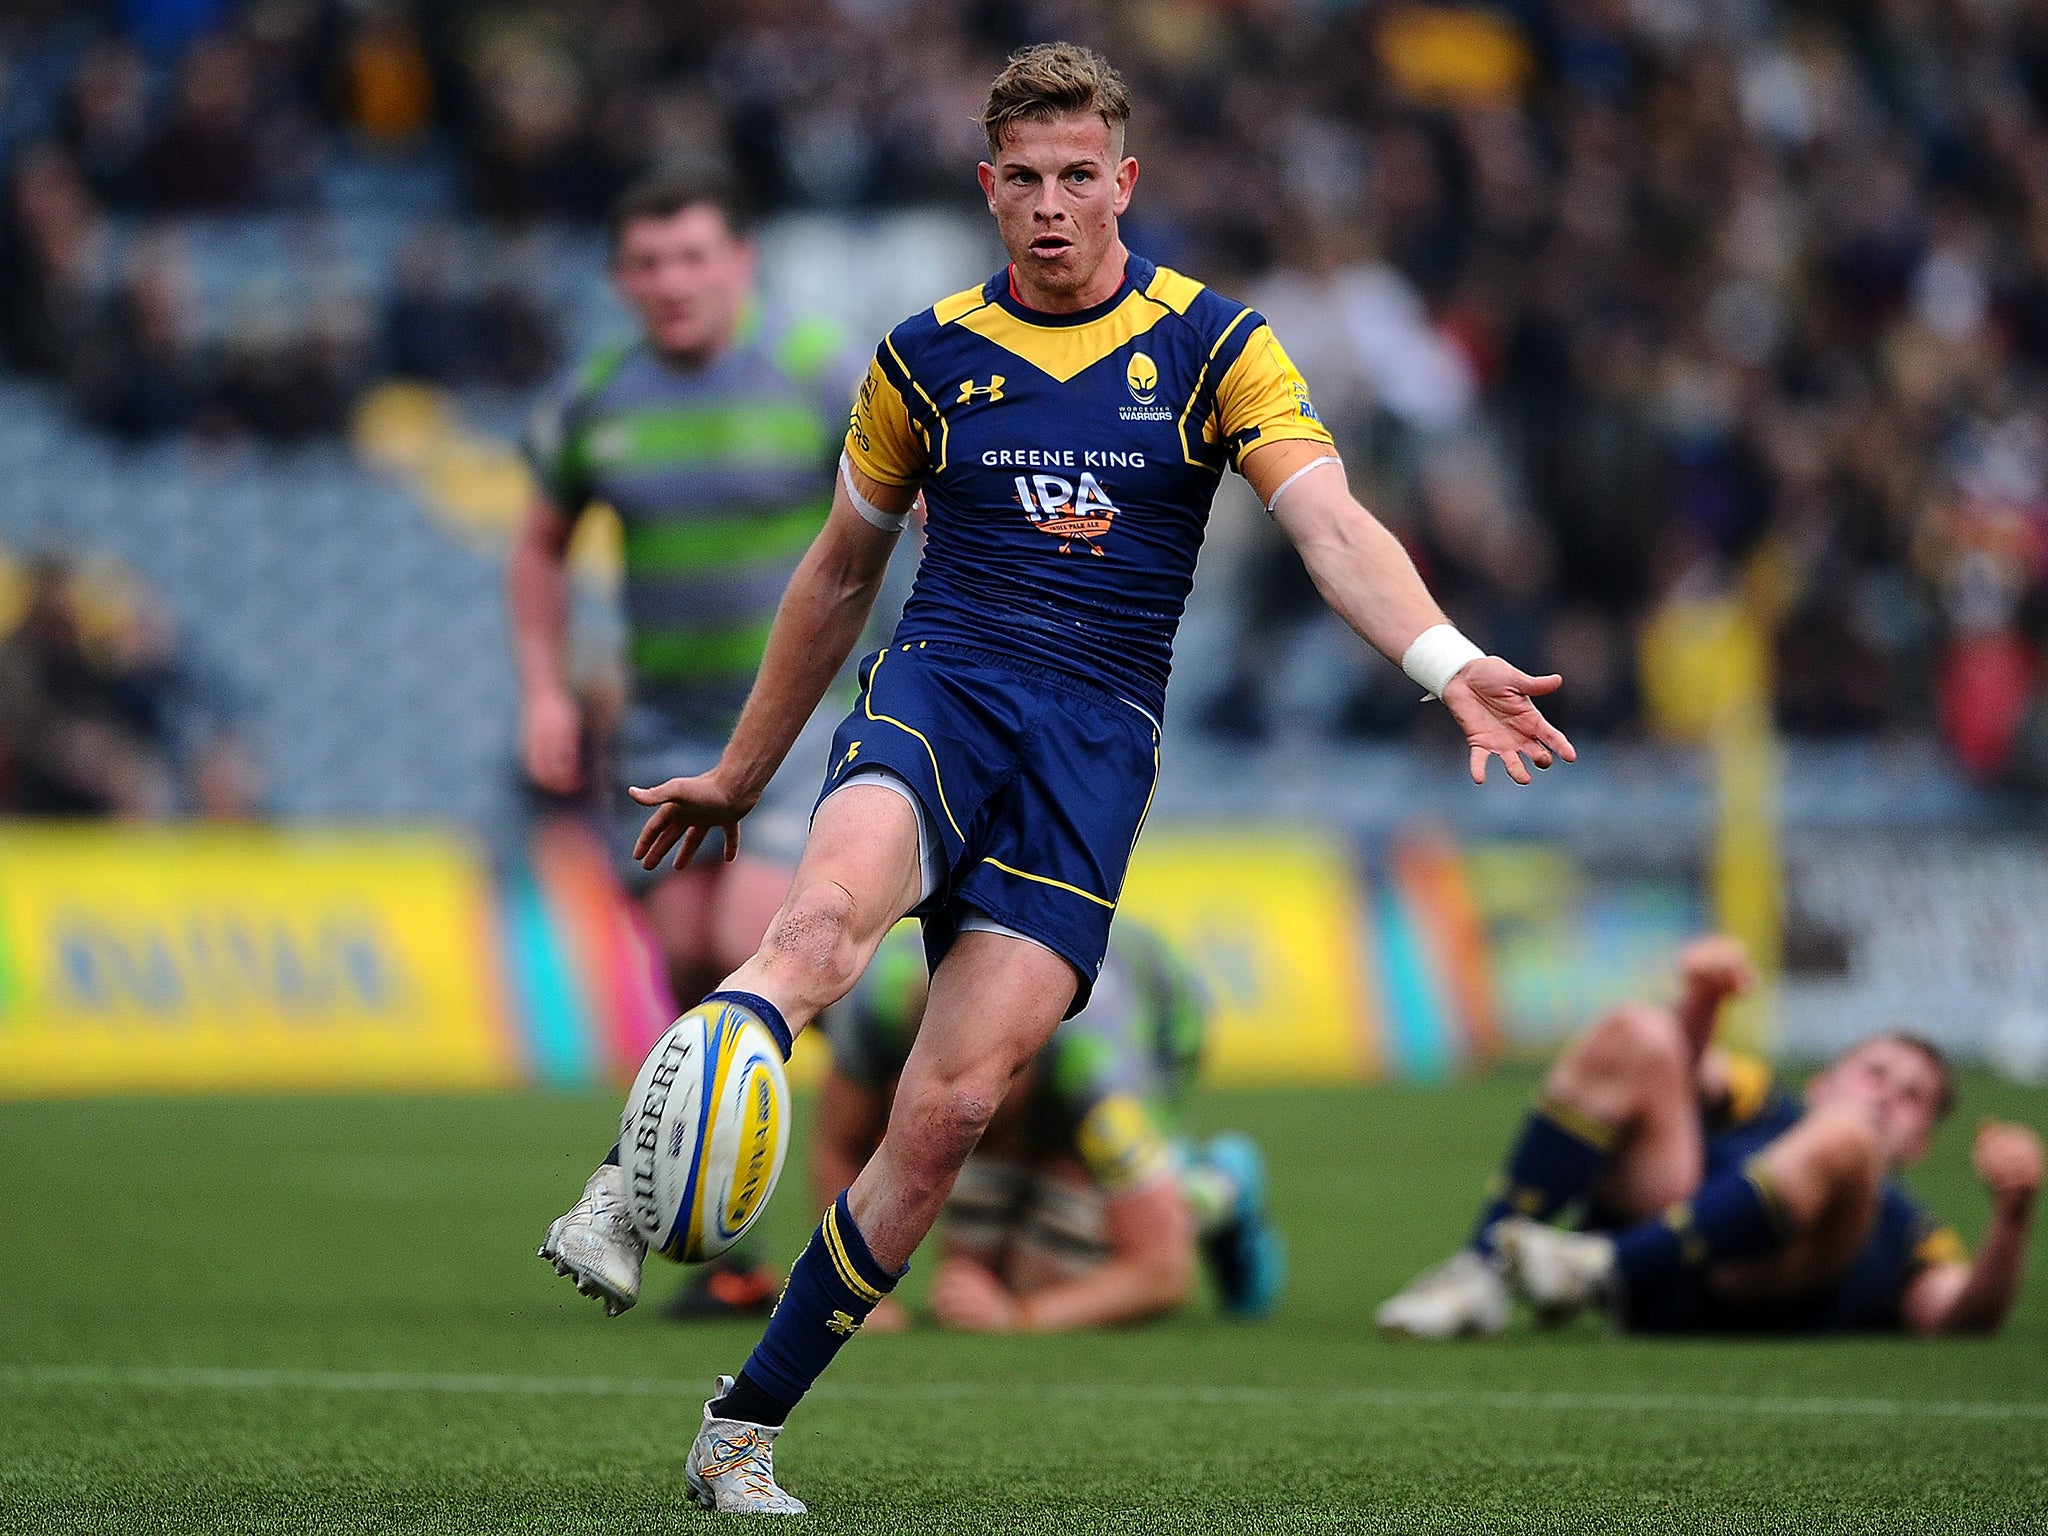 Michael Dowsett kicked seven points for Worcester